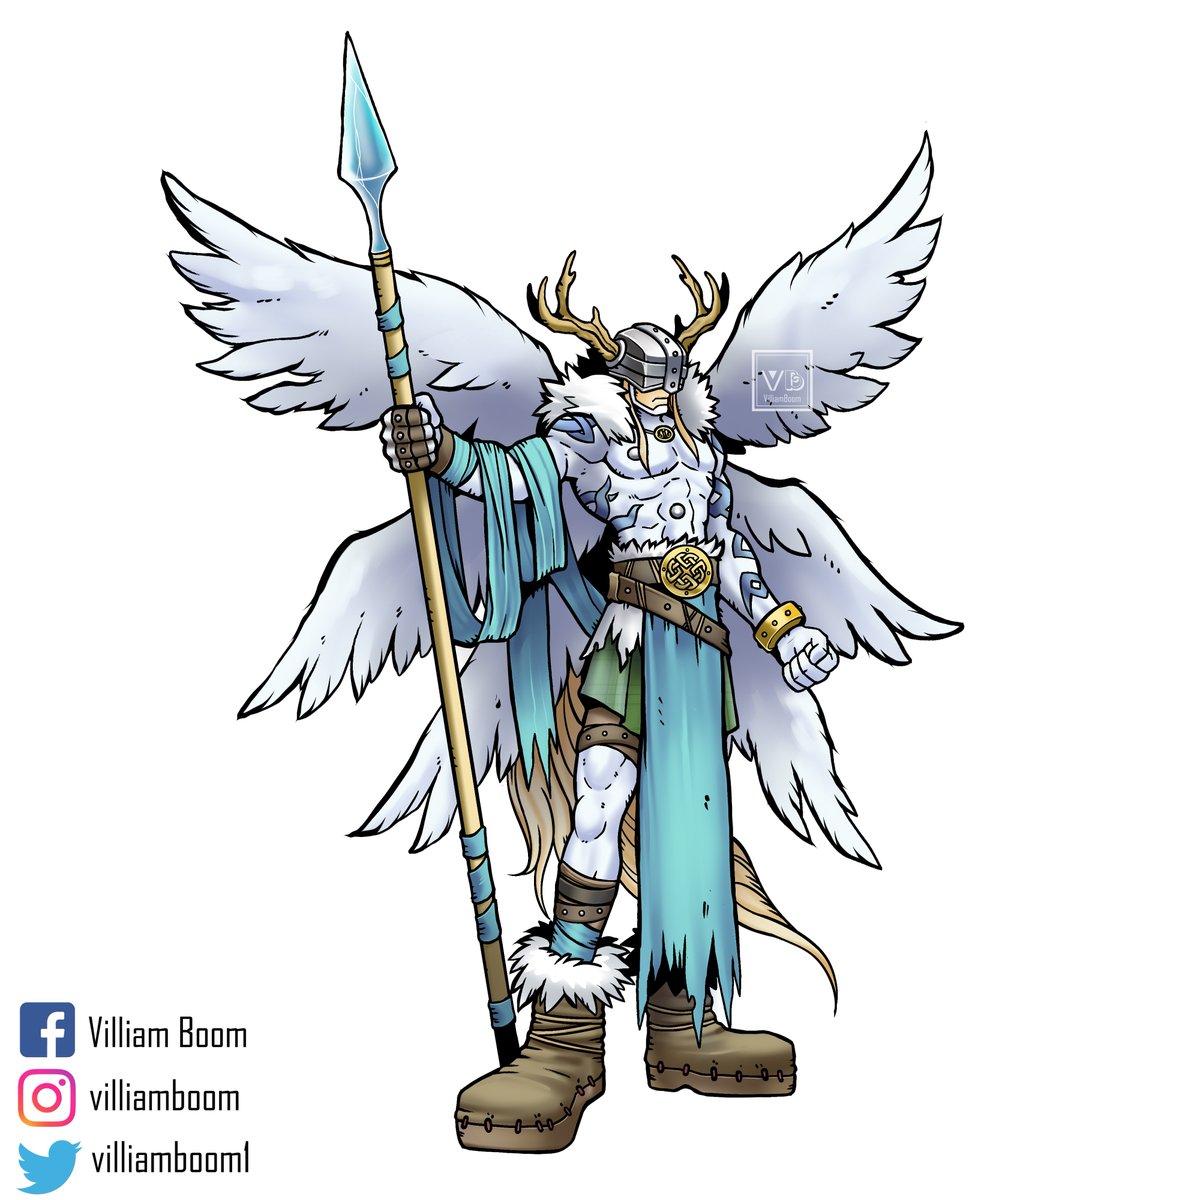 Commission done for Heartofkings9! Ice Angemon!

#digimon #digimonart #digimonfanart #DigimonOC #angemon #art #characterart 
If you want an artwork like this send me a DM!